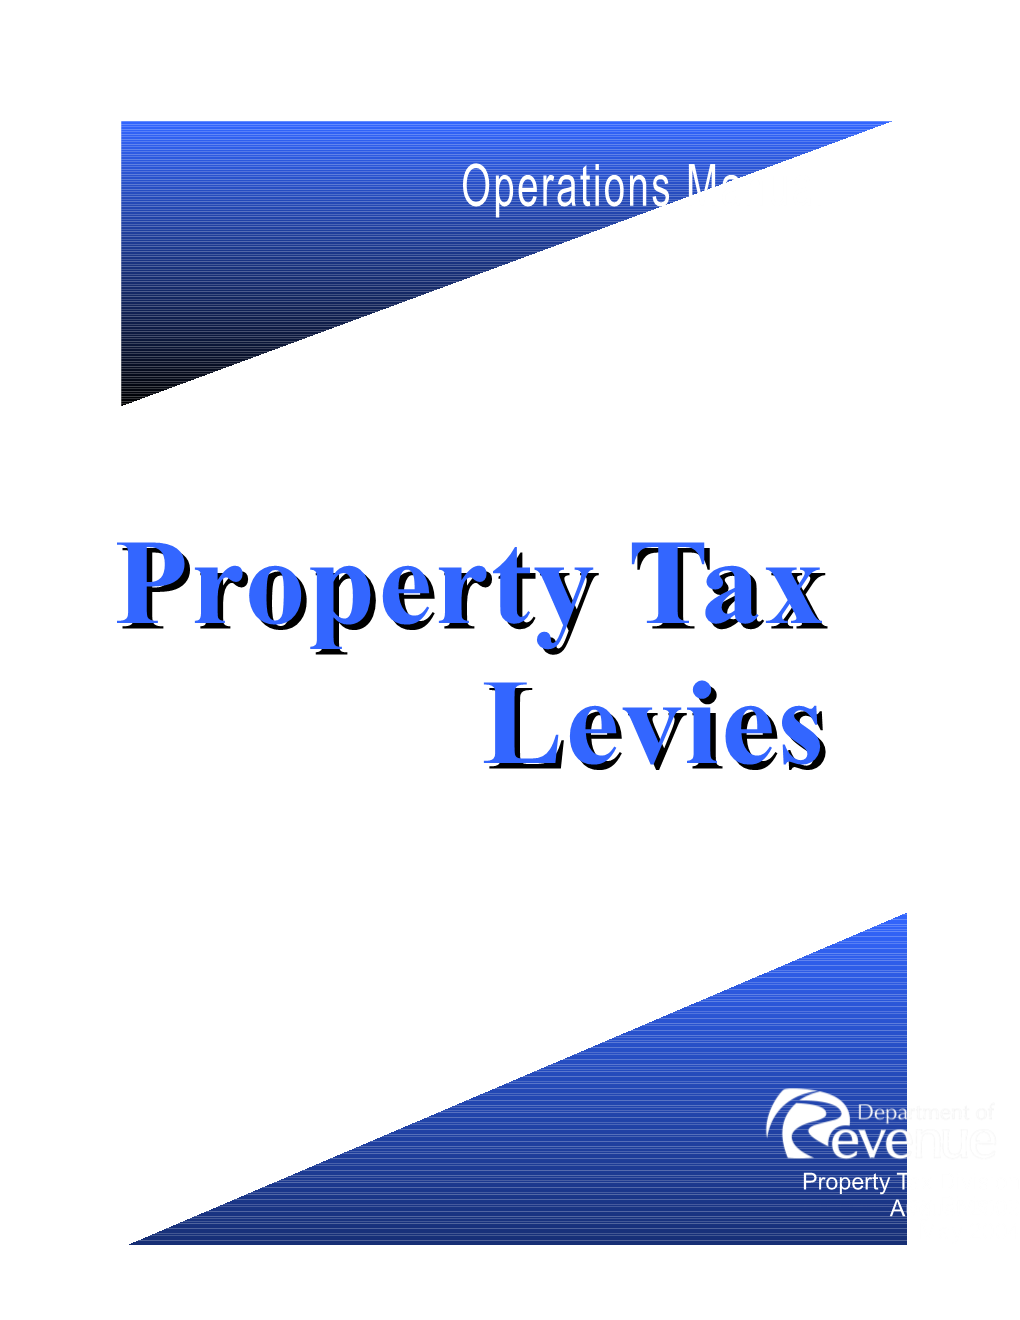 2009 Property Tax Levy Manual